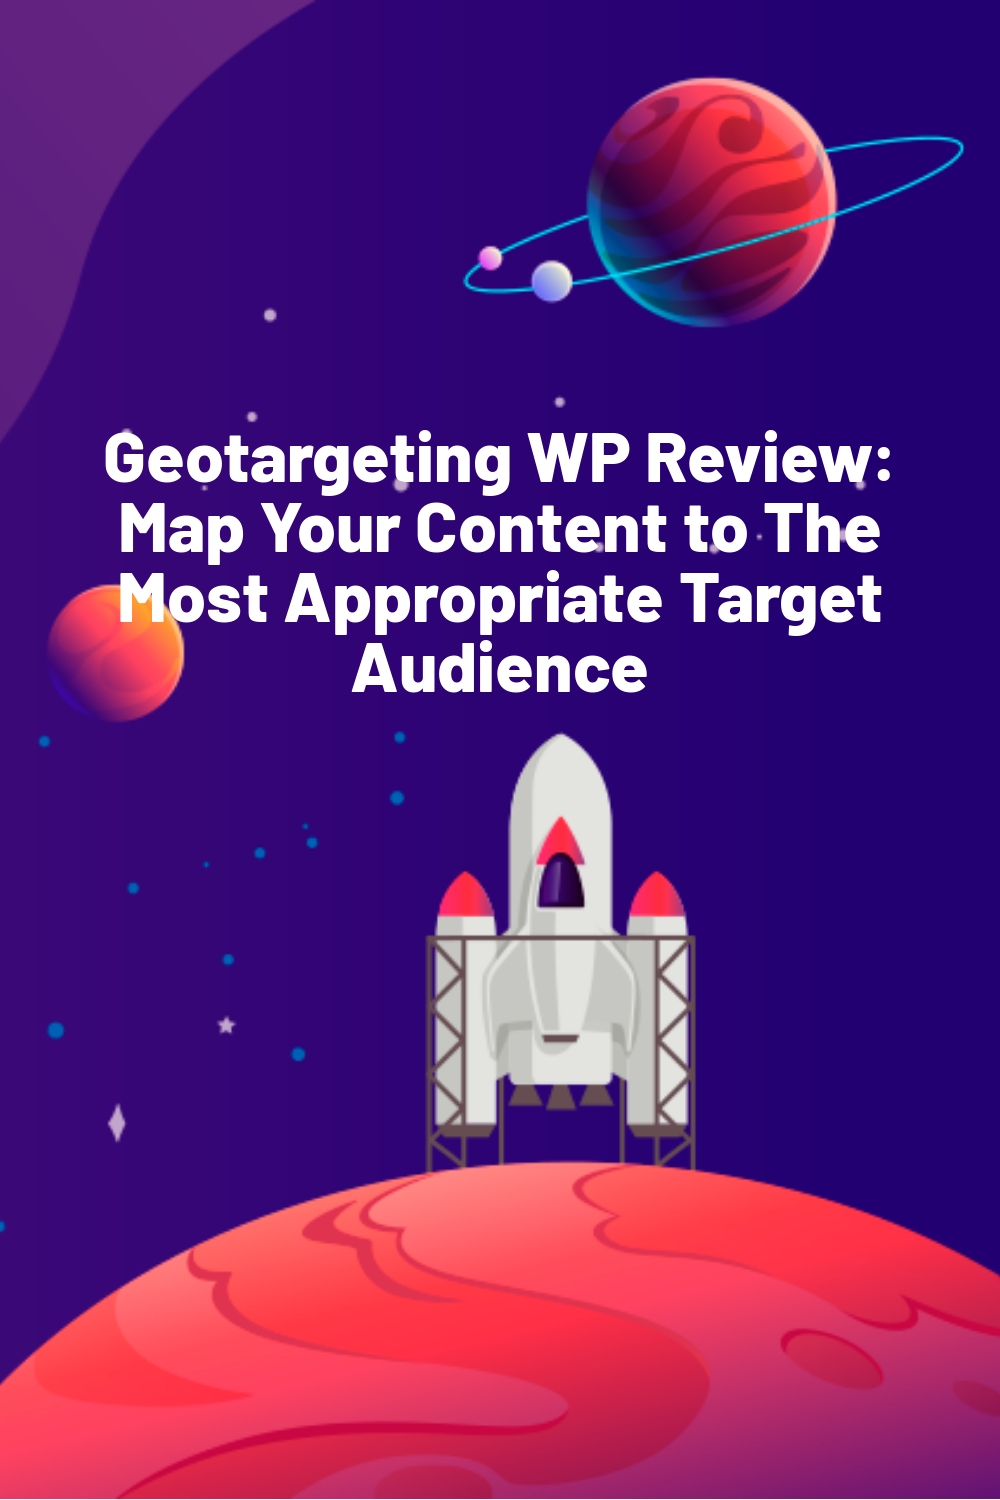 Geotargeting WP Review: Map Your Content to The Most Appropriate Target Audience